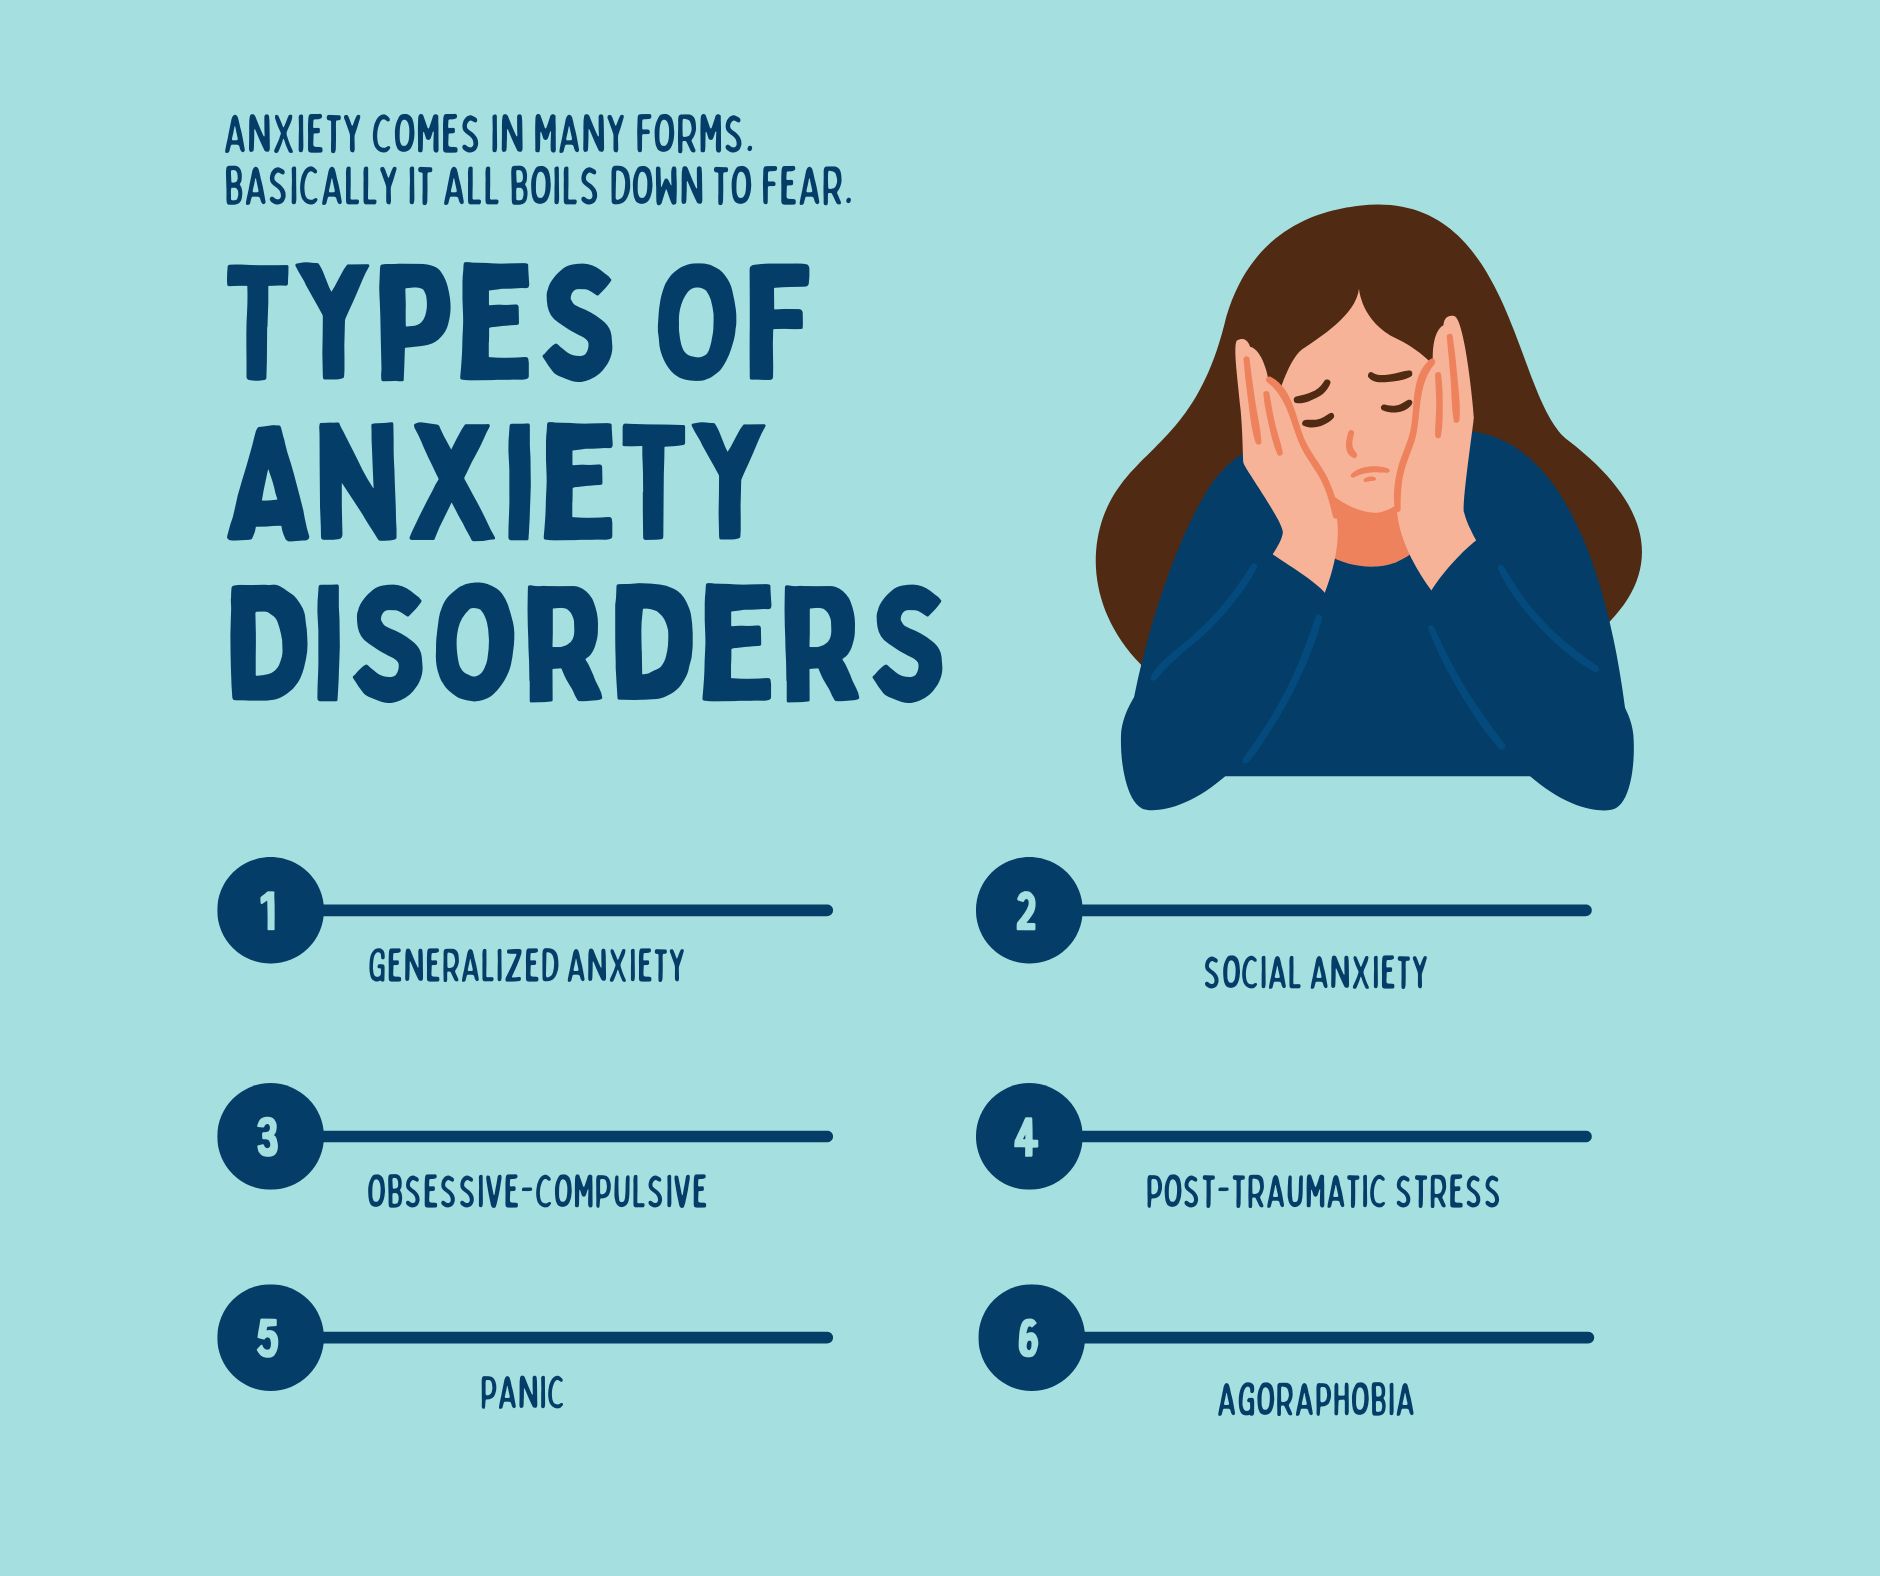 There are many kinds of anxiety disorders, but they all boil down to fear